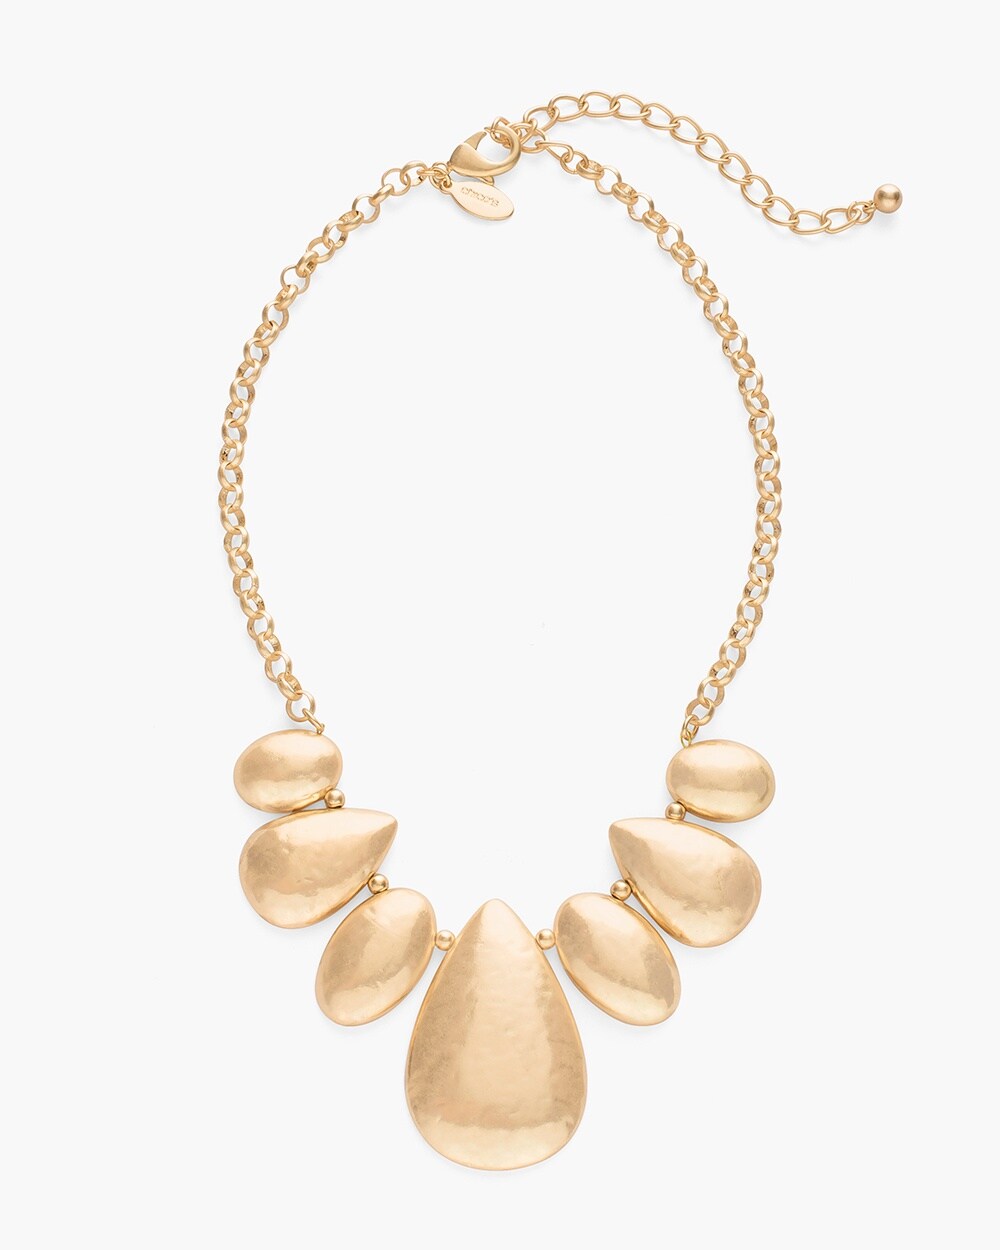 Gold-Tone Domed Bib Necklace